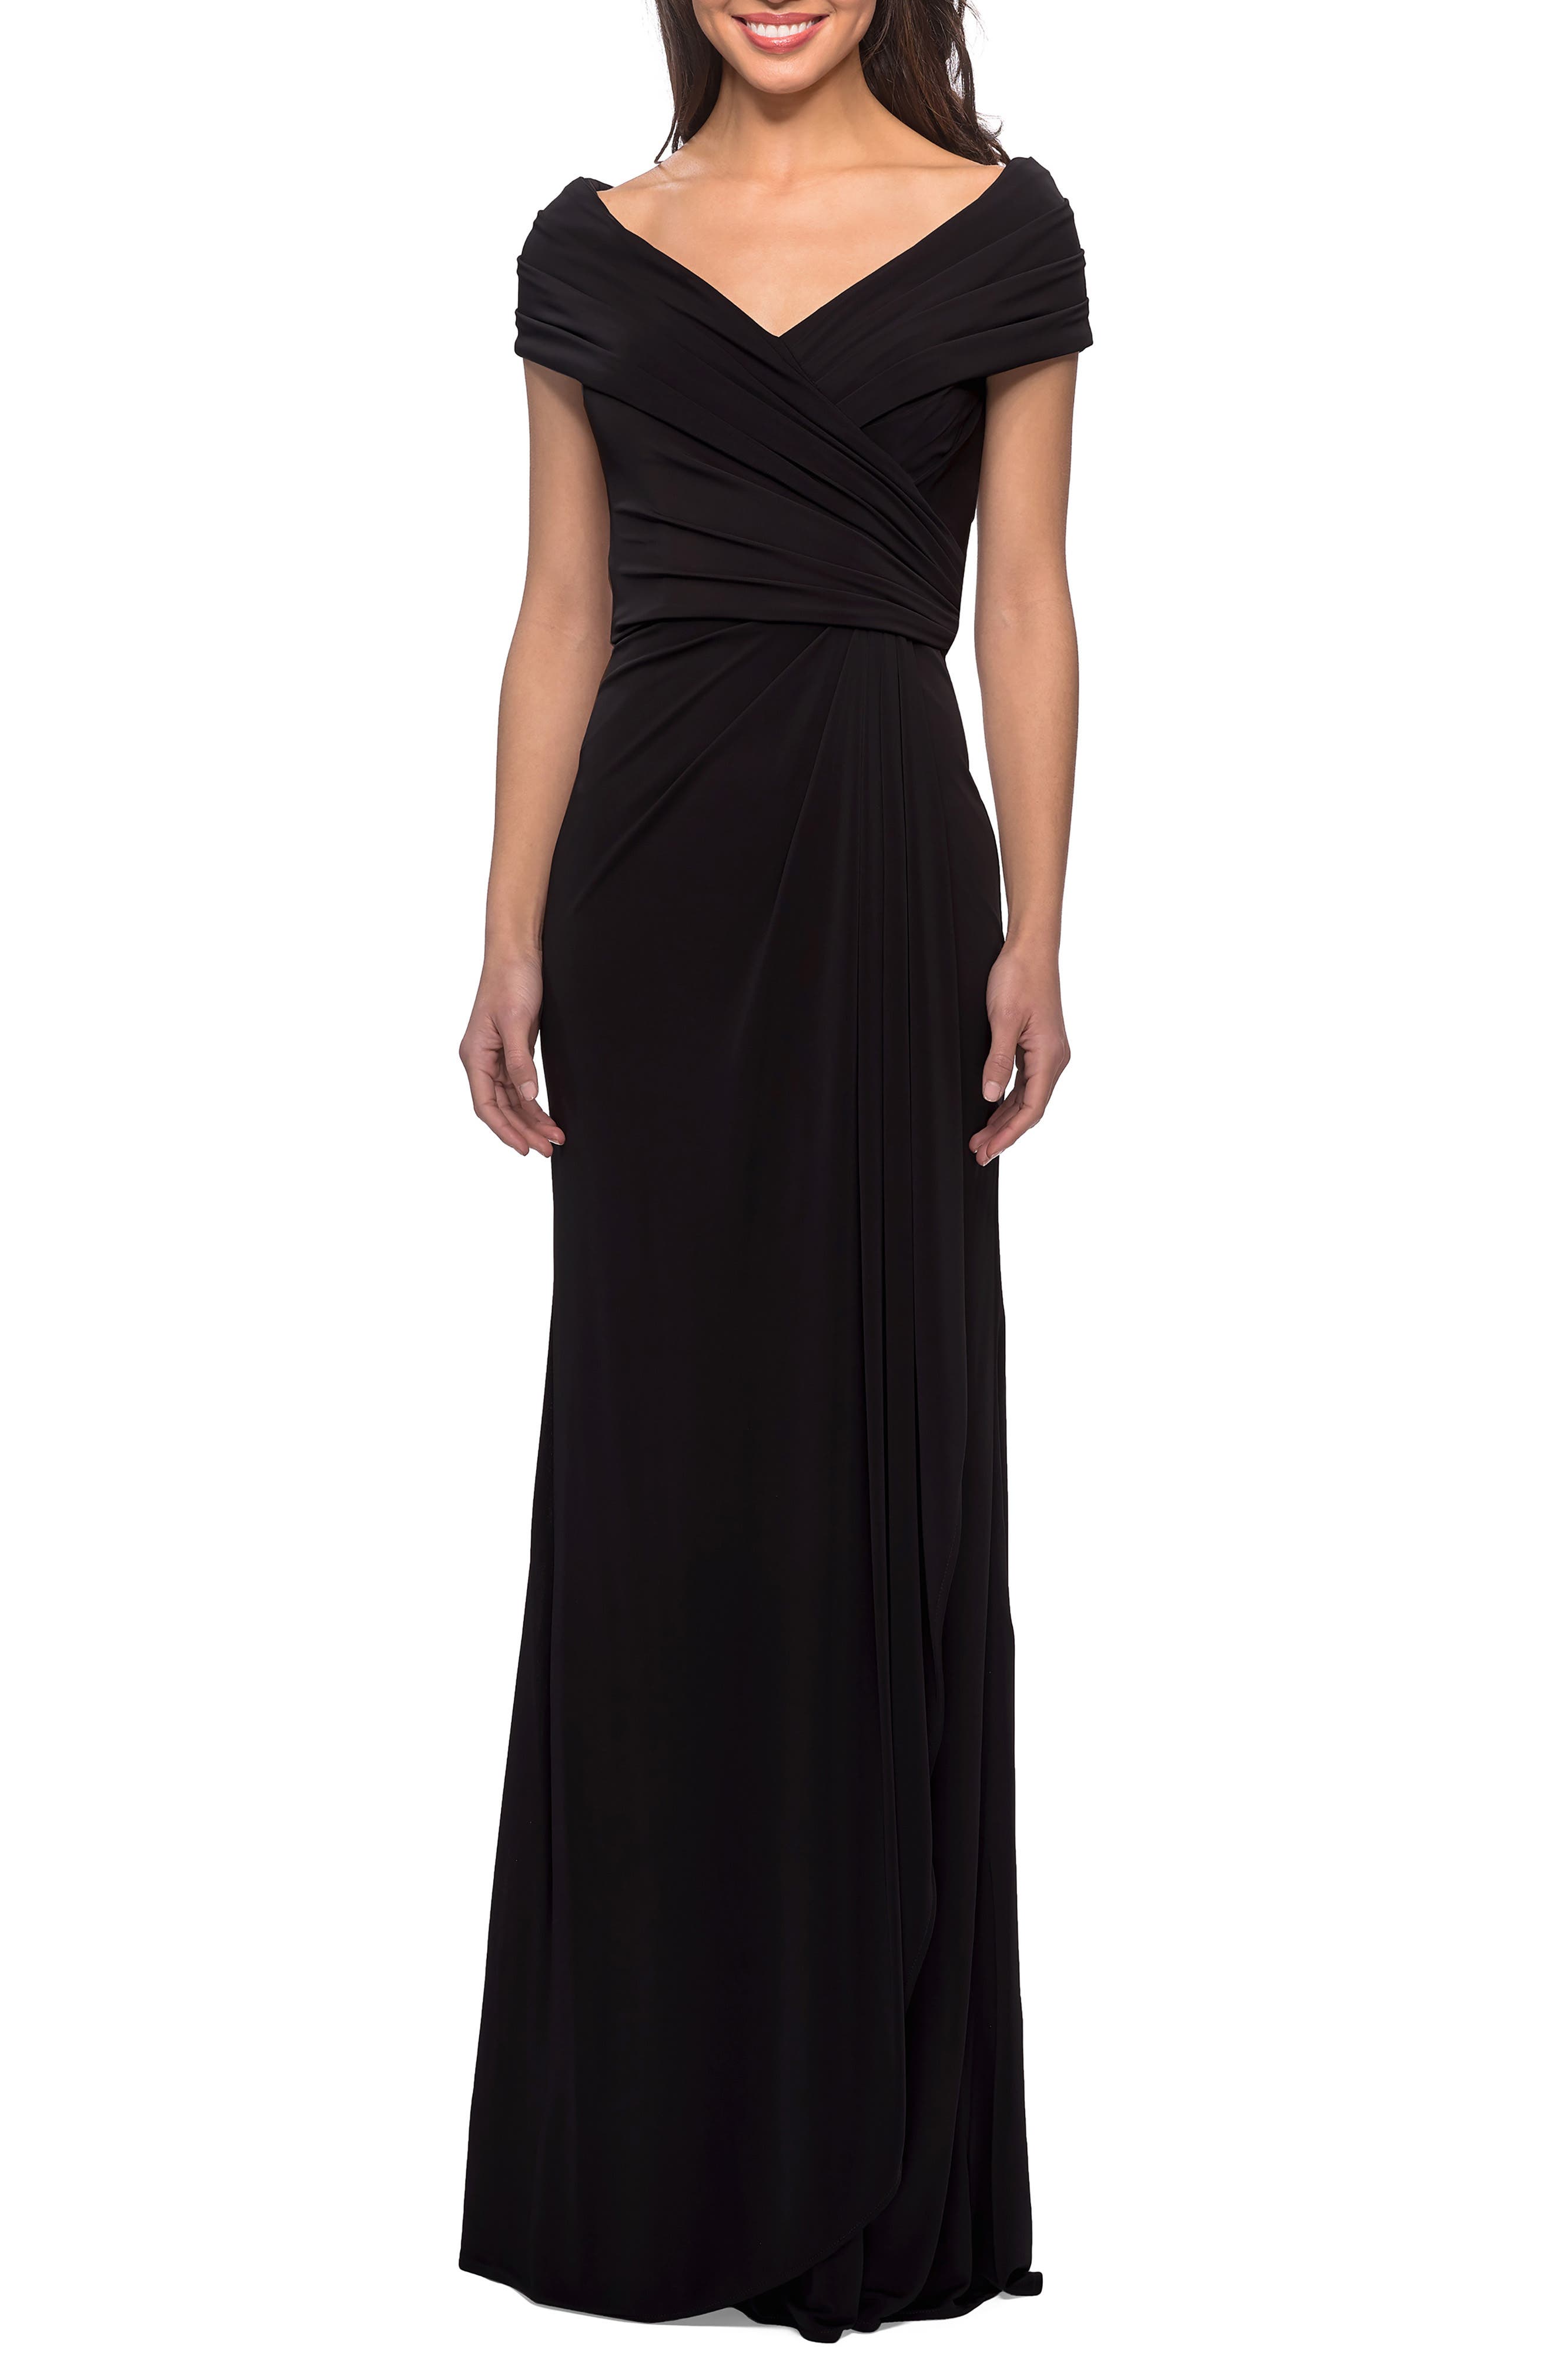 Buy Black Evening Gown Dresses In Stock